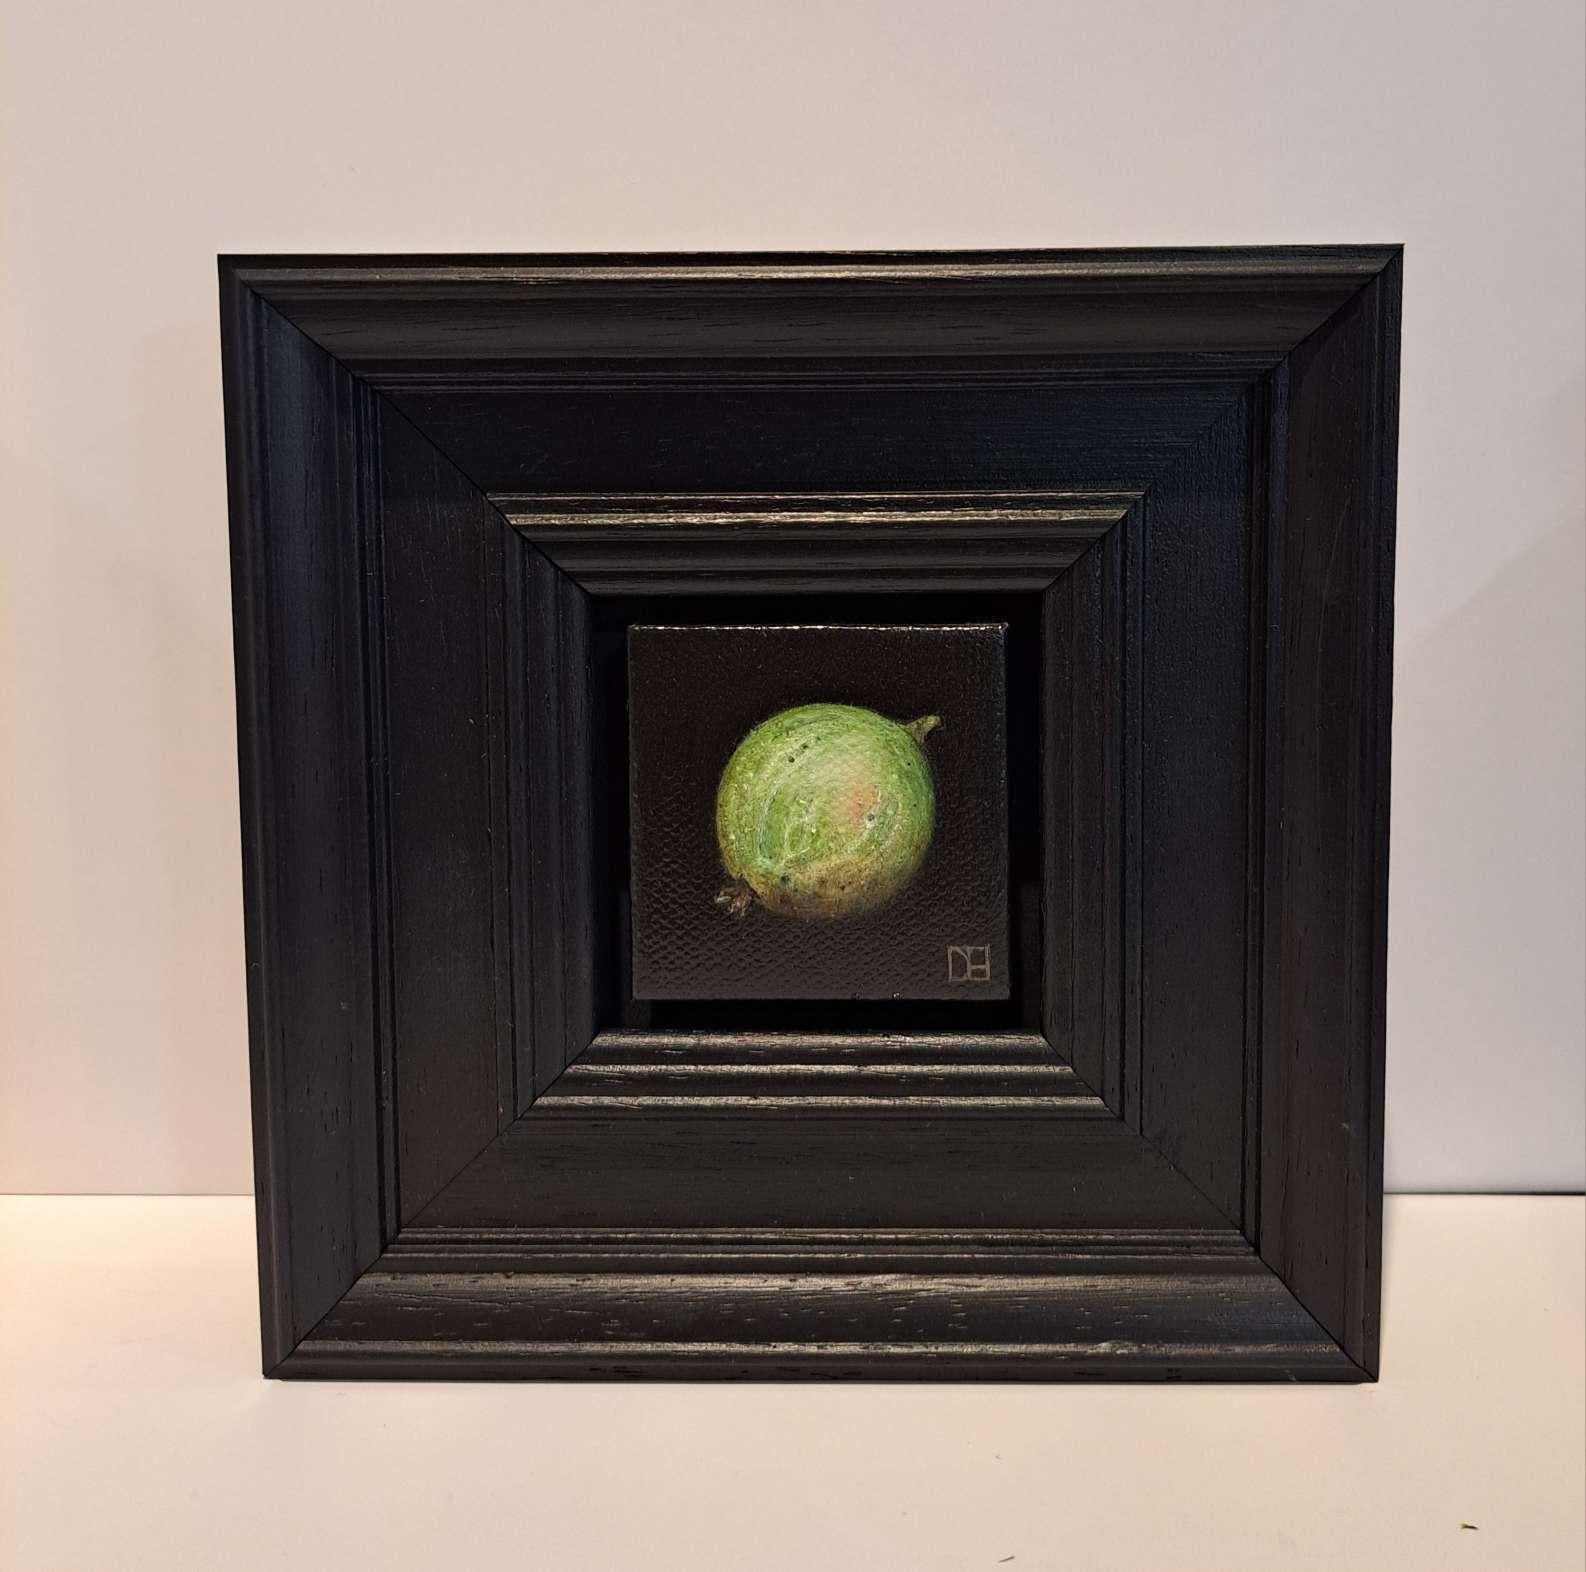 Pocket Green Gooseberry 2 c is an original oil painting by Dani Humberstone as part of her Pocket Painting series featuring small scale realistic oil paintings, with a nod to baroque still life painting. The paintings are set in a black wood layered